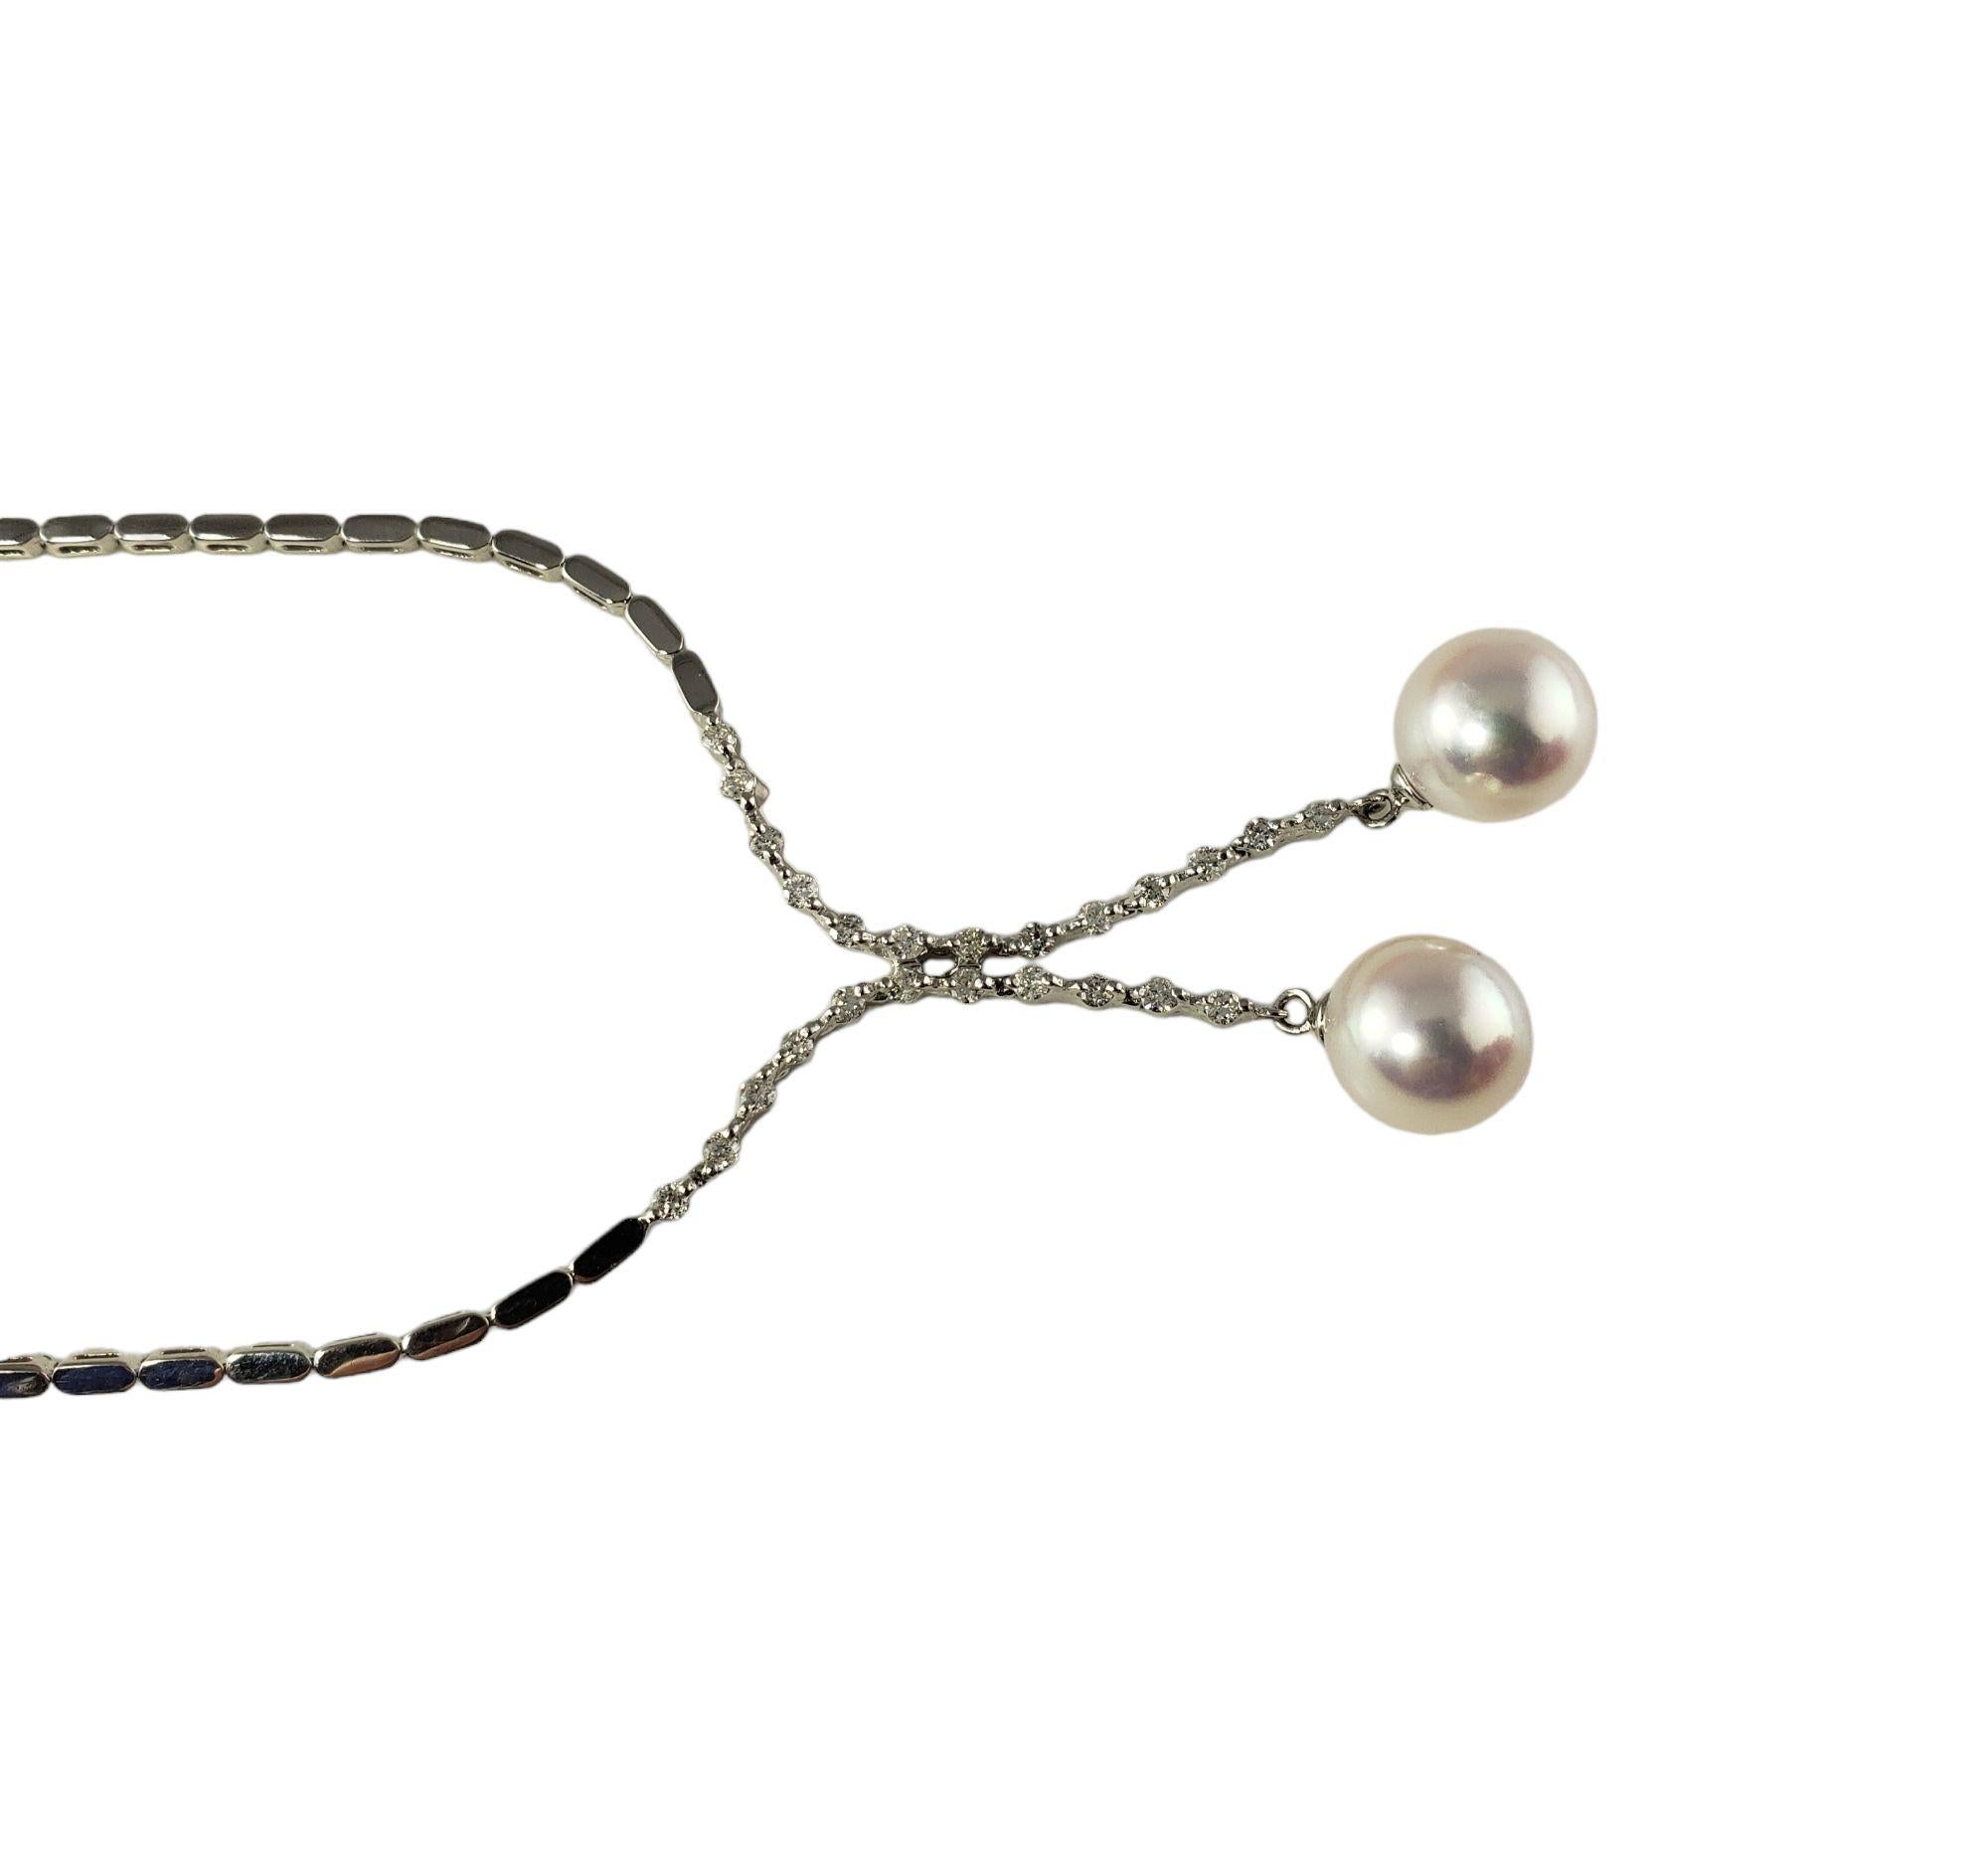 Vintage 18 Karat White Gold Akoya Pearl and Diamond Necklace JAGi Certified-

This exquisite drop necklace features 25 round brilliant cut diamonds and two Akoya pearls (9.6 mm each) set in beautifully detailed 18K white gold.

Total diamond weight: